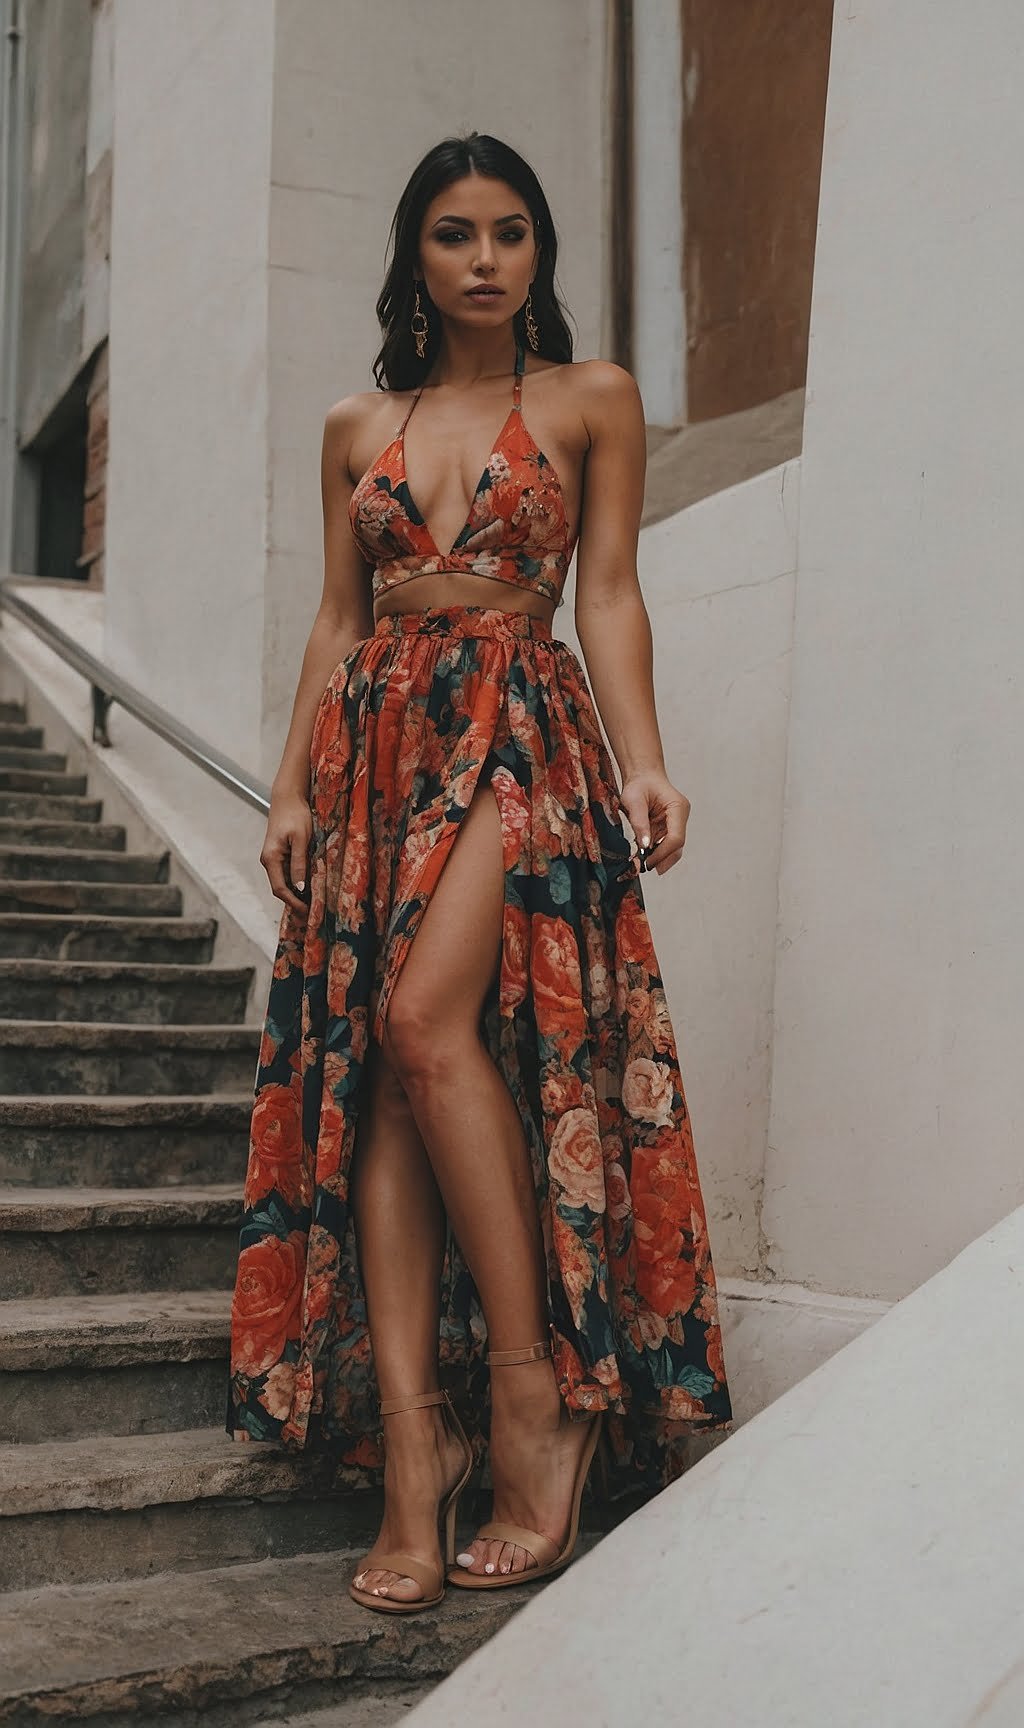 Floral Fantasy: Flowy Maxi Dress with High Slit in Blossom Print